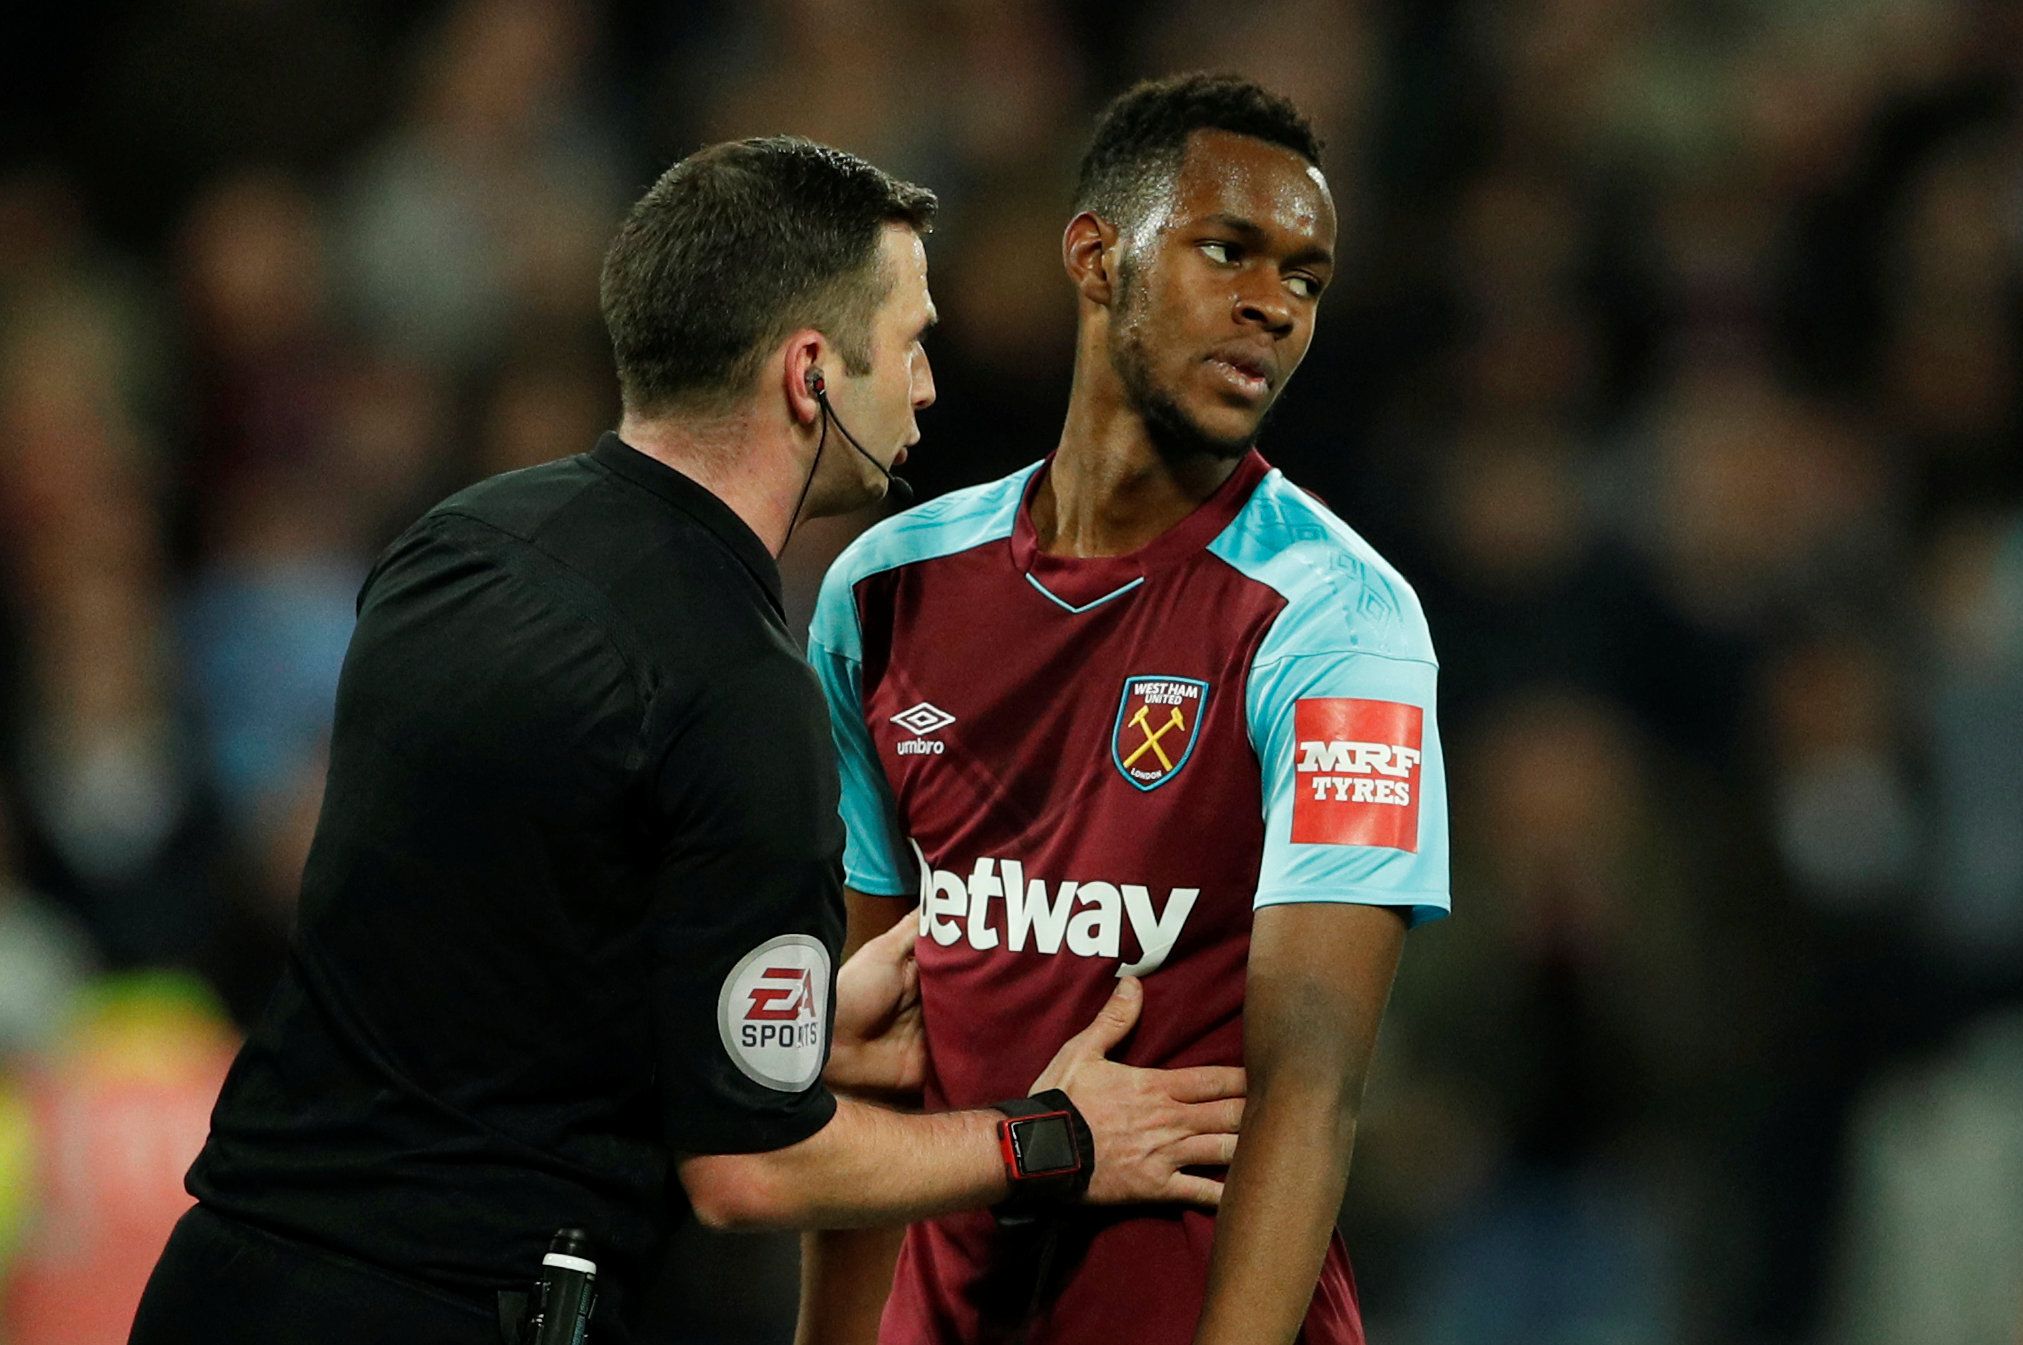 Soccer Football - Premier League - West Ham United vs Stoke City - London Stadium, London, Britain - April 16, 2018   West Ham United's Edimilson Fernandes speaks with referee Michael Oliver after a goal is disallowed    Action Images via Reuters/John Sibley    EDITORIAL USE ONLY. No use with unauthorized audio, video, data, fixture lists, club/league logos or 